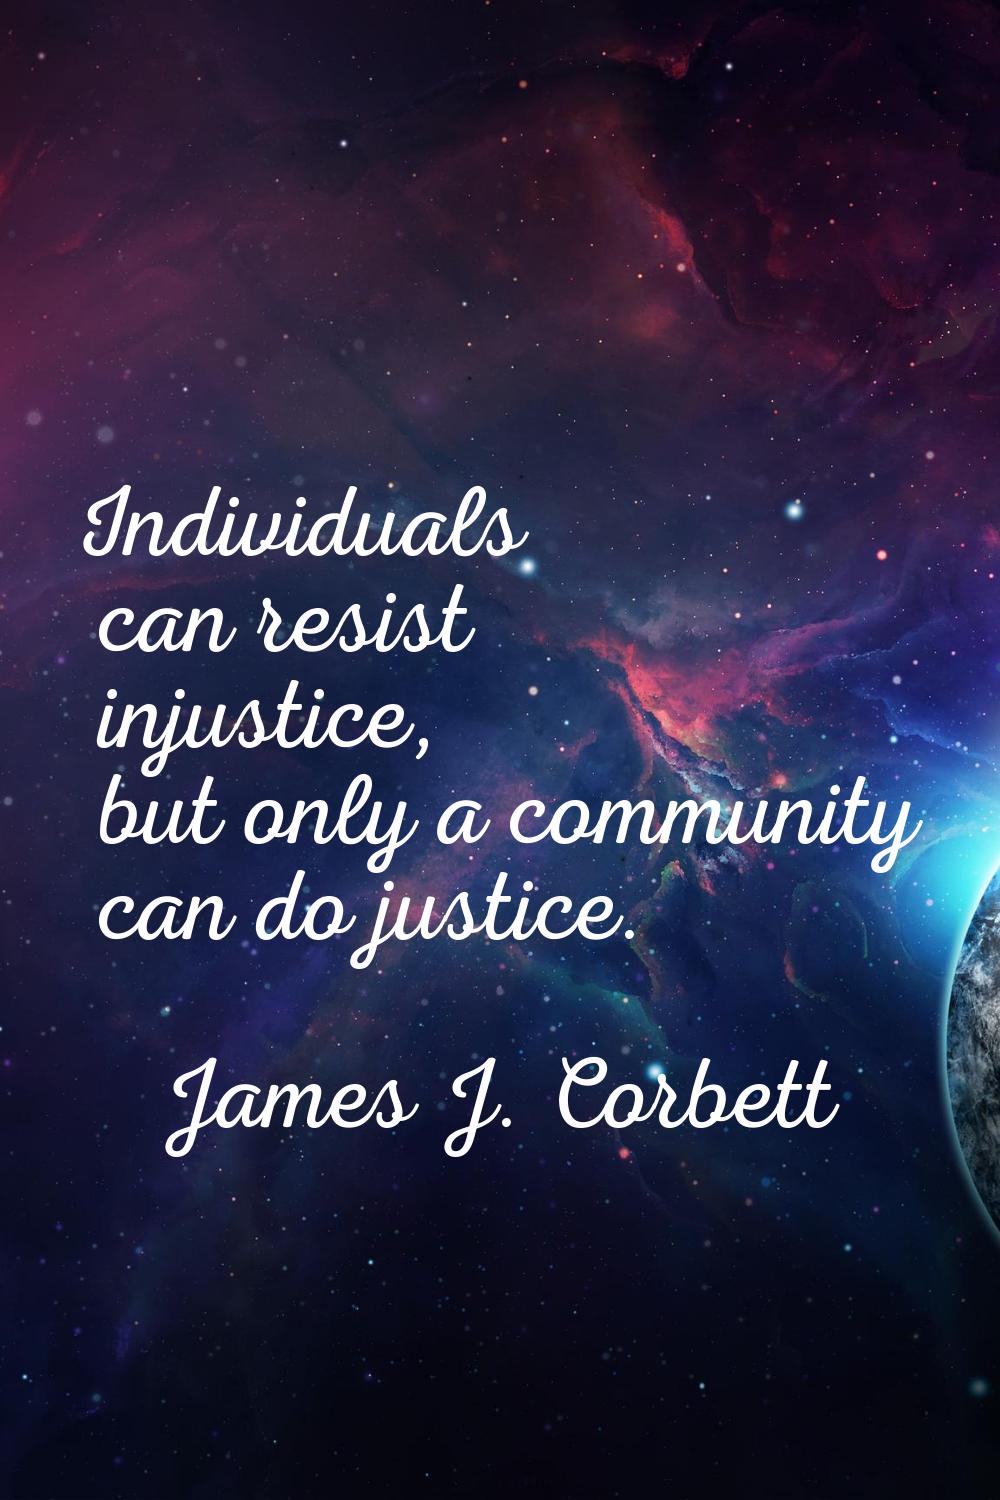 Individuals can resist injustice, but only a community can do justice.